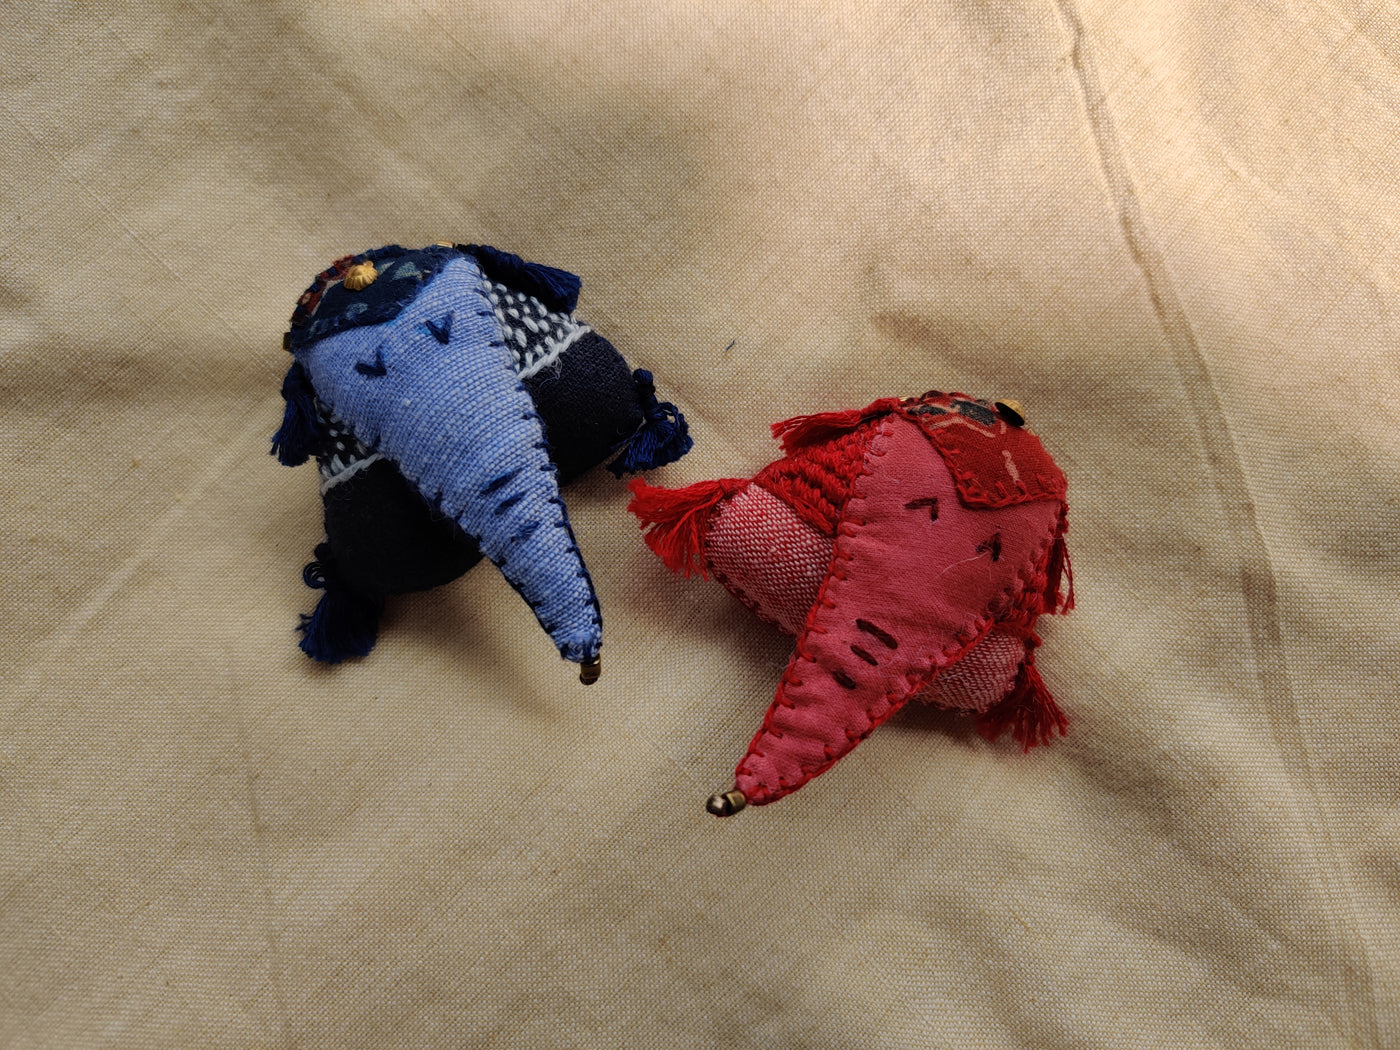 Red and blue elephant shaped brooch pin